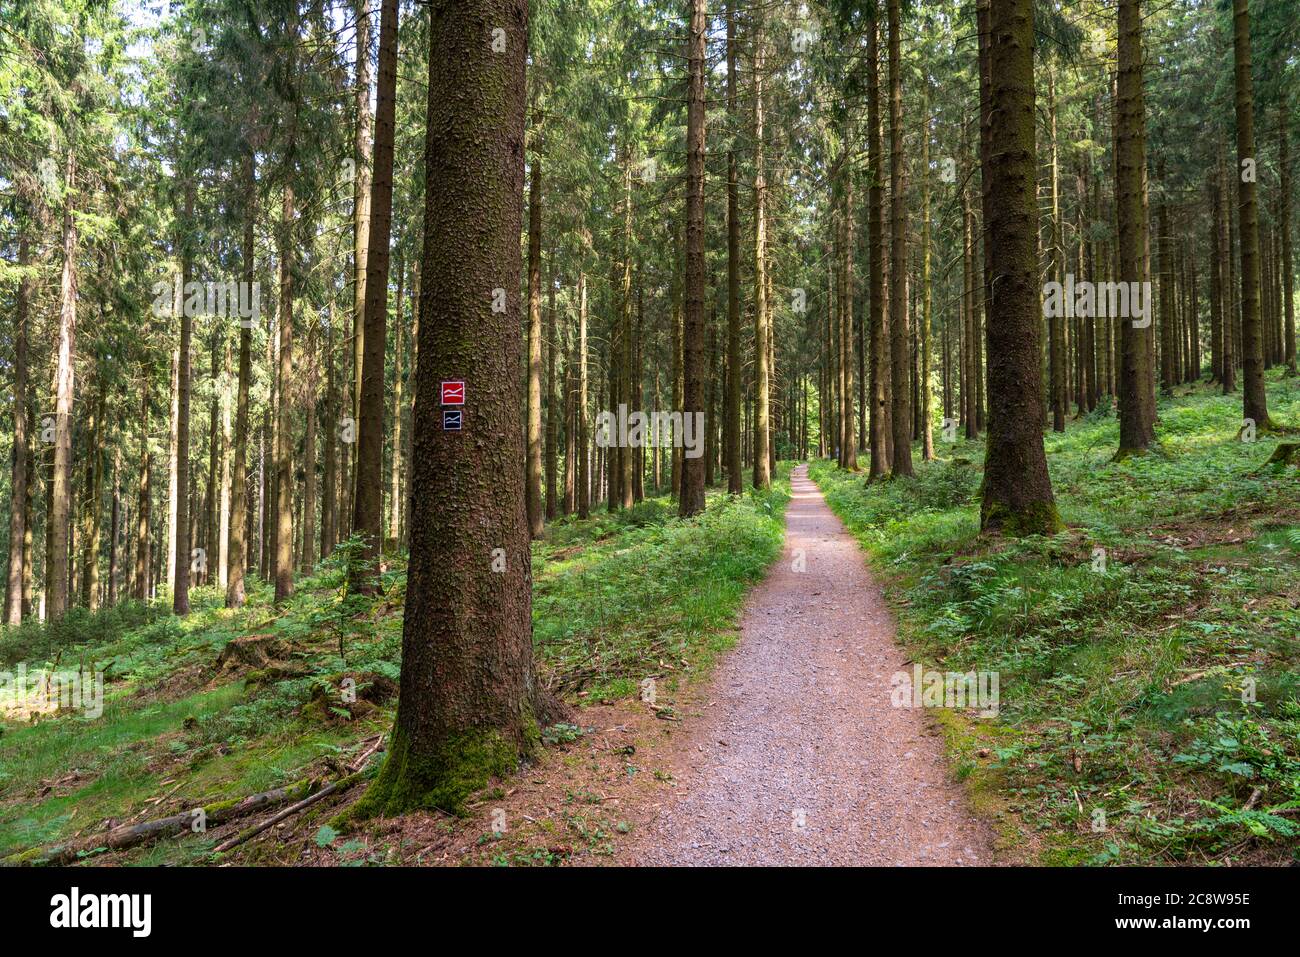 Landscape in the Rothaargebirge, Sauerland, on the Rothaarsteig, hiking trail, Roter Fingerhut, near Jagdhaus, south of Schmallenberg, NRW, Germany, Stock Photo